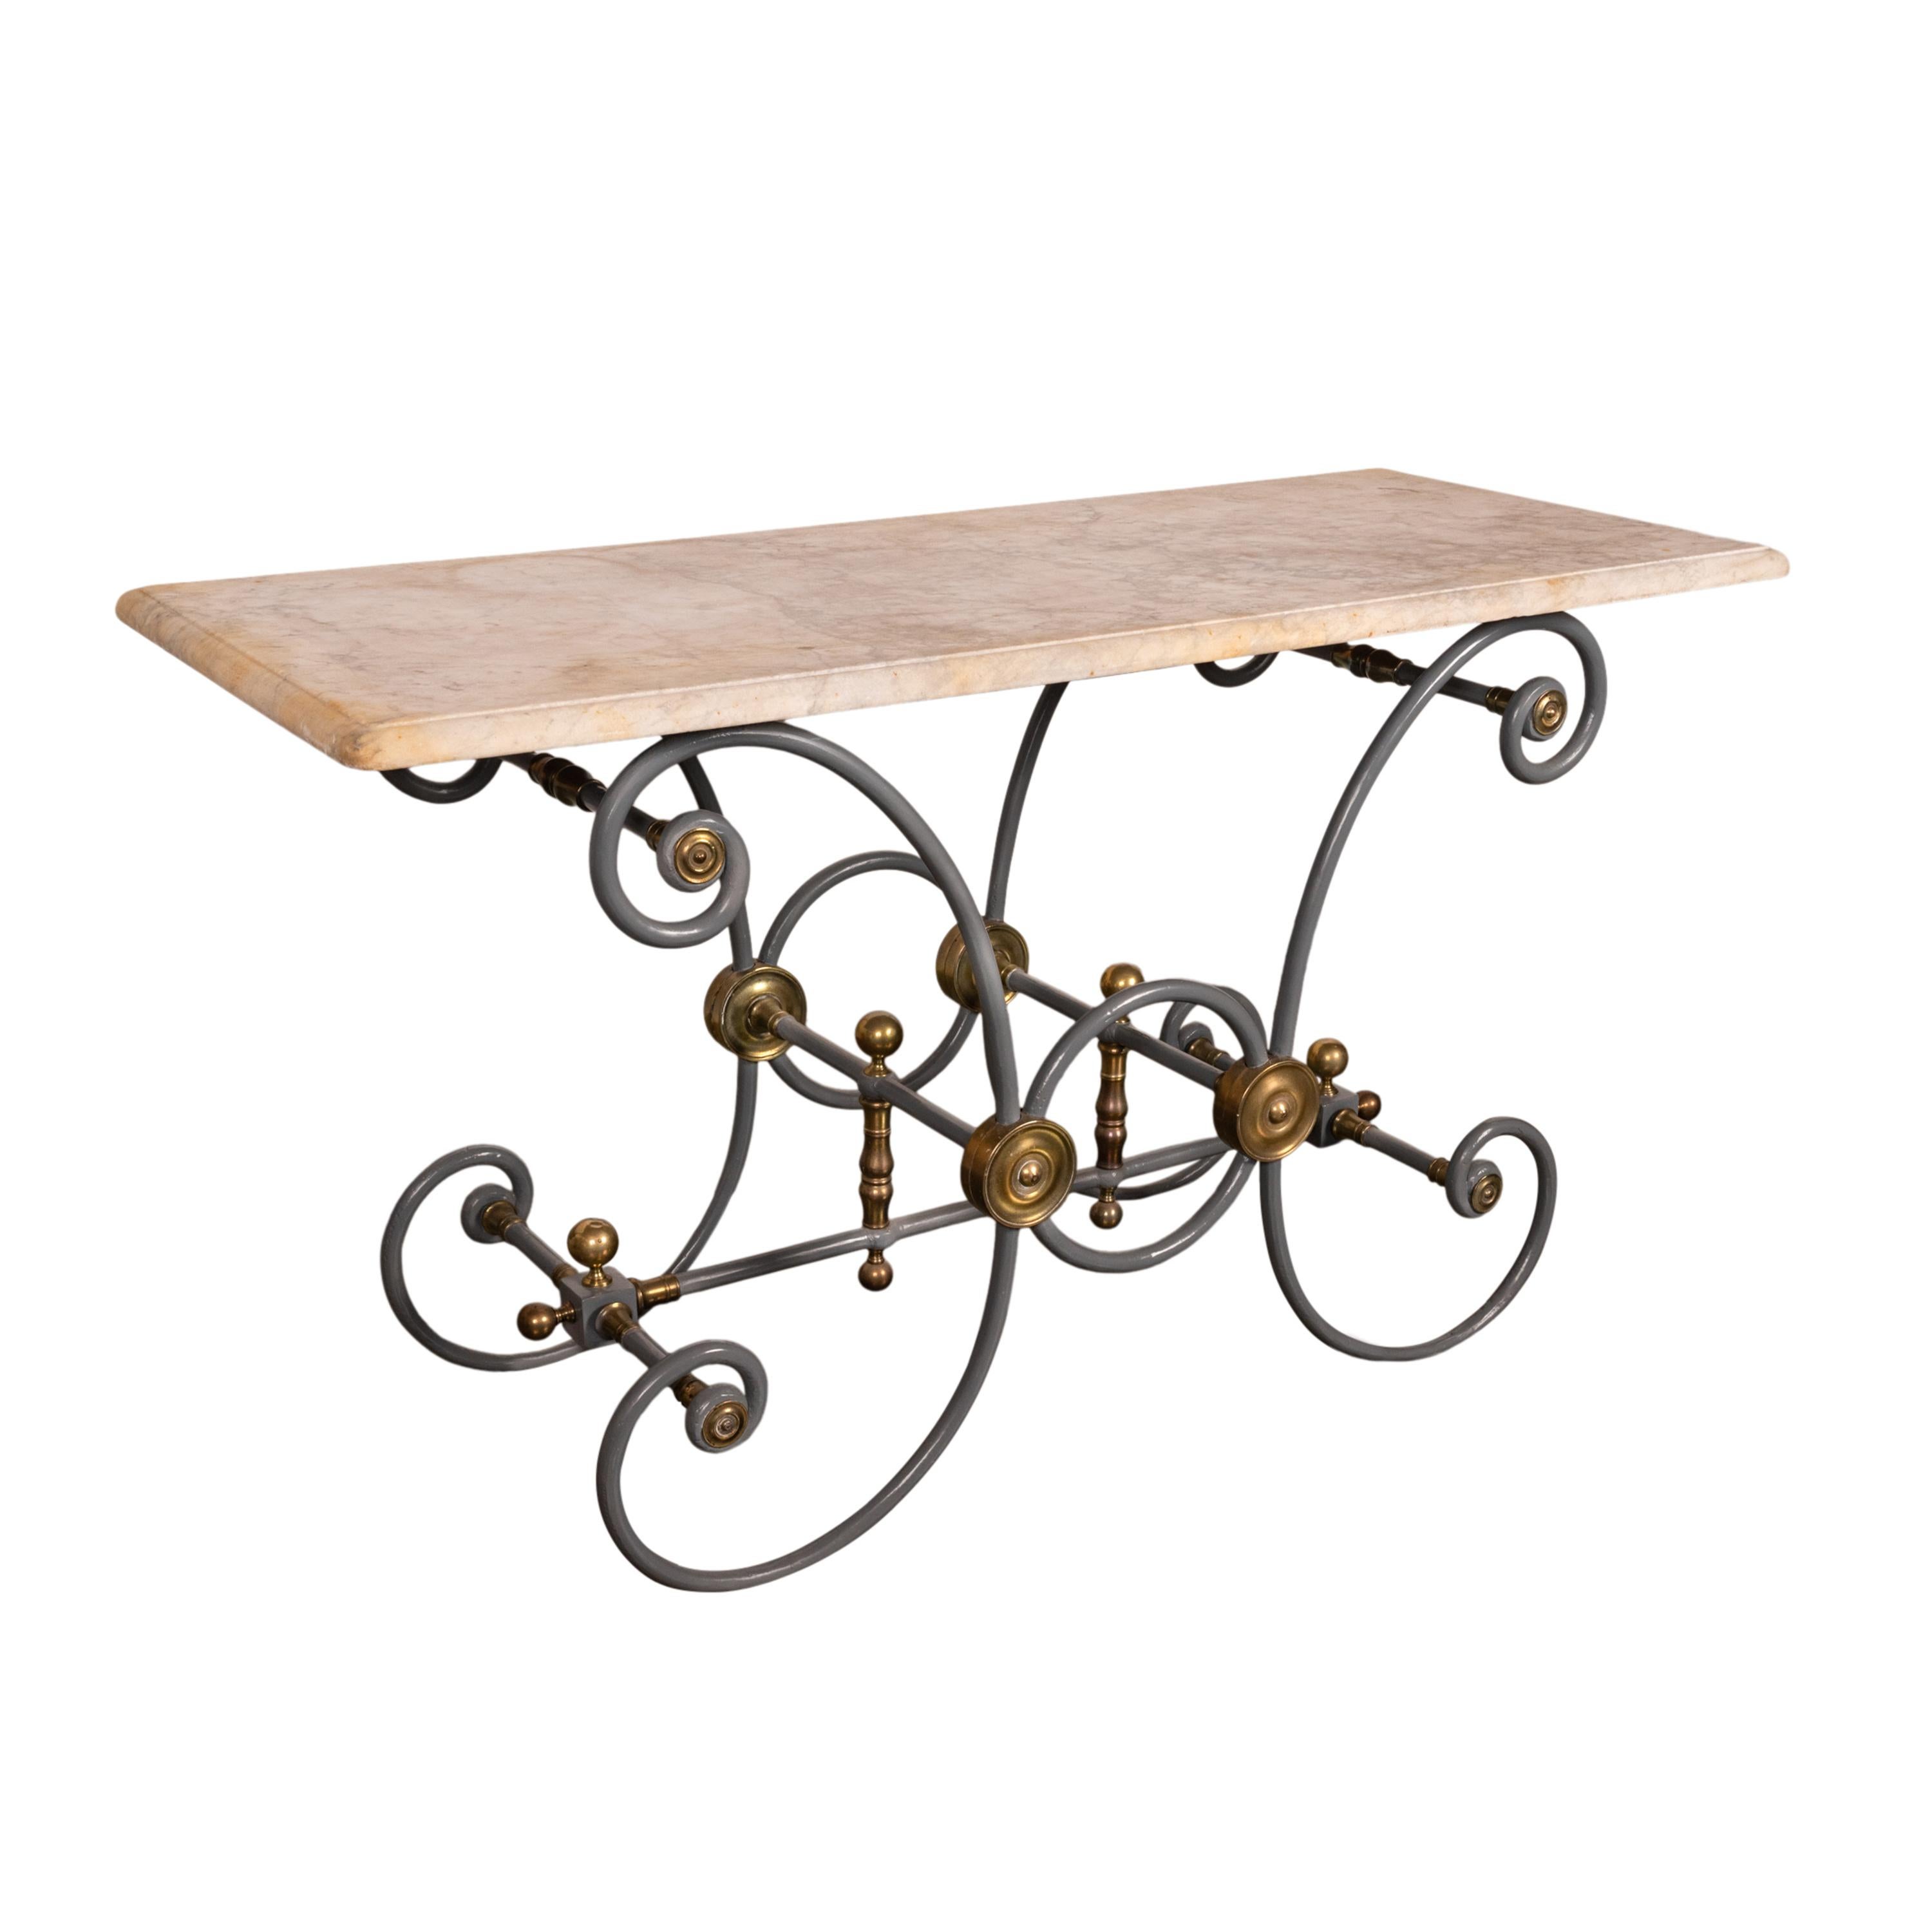 Antique French Provincial painted iron & brass marble top baker's table, circa 1880.
This very handsome table having the original white marble top, the top having a finished curved edge on each side allowing the table to be in the middle of a